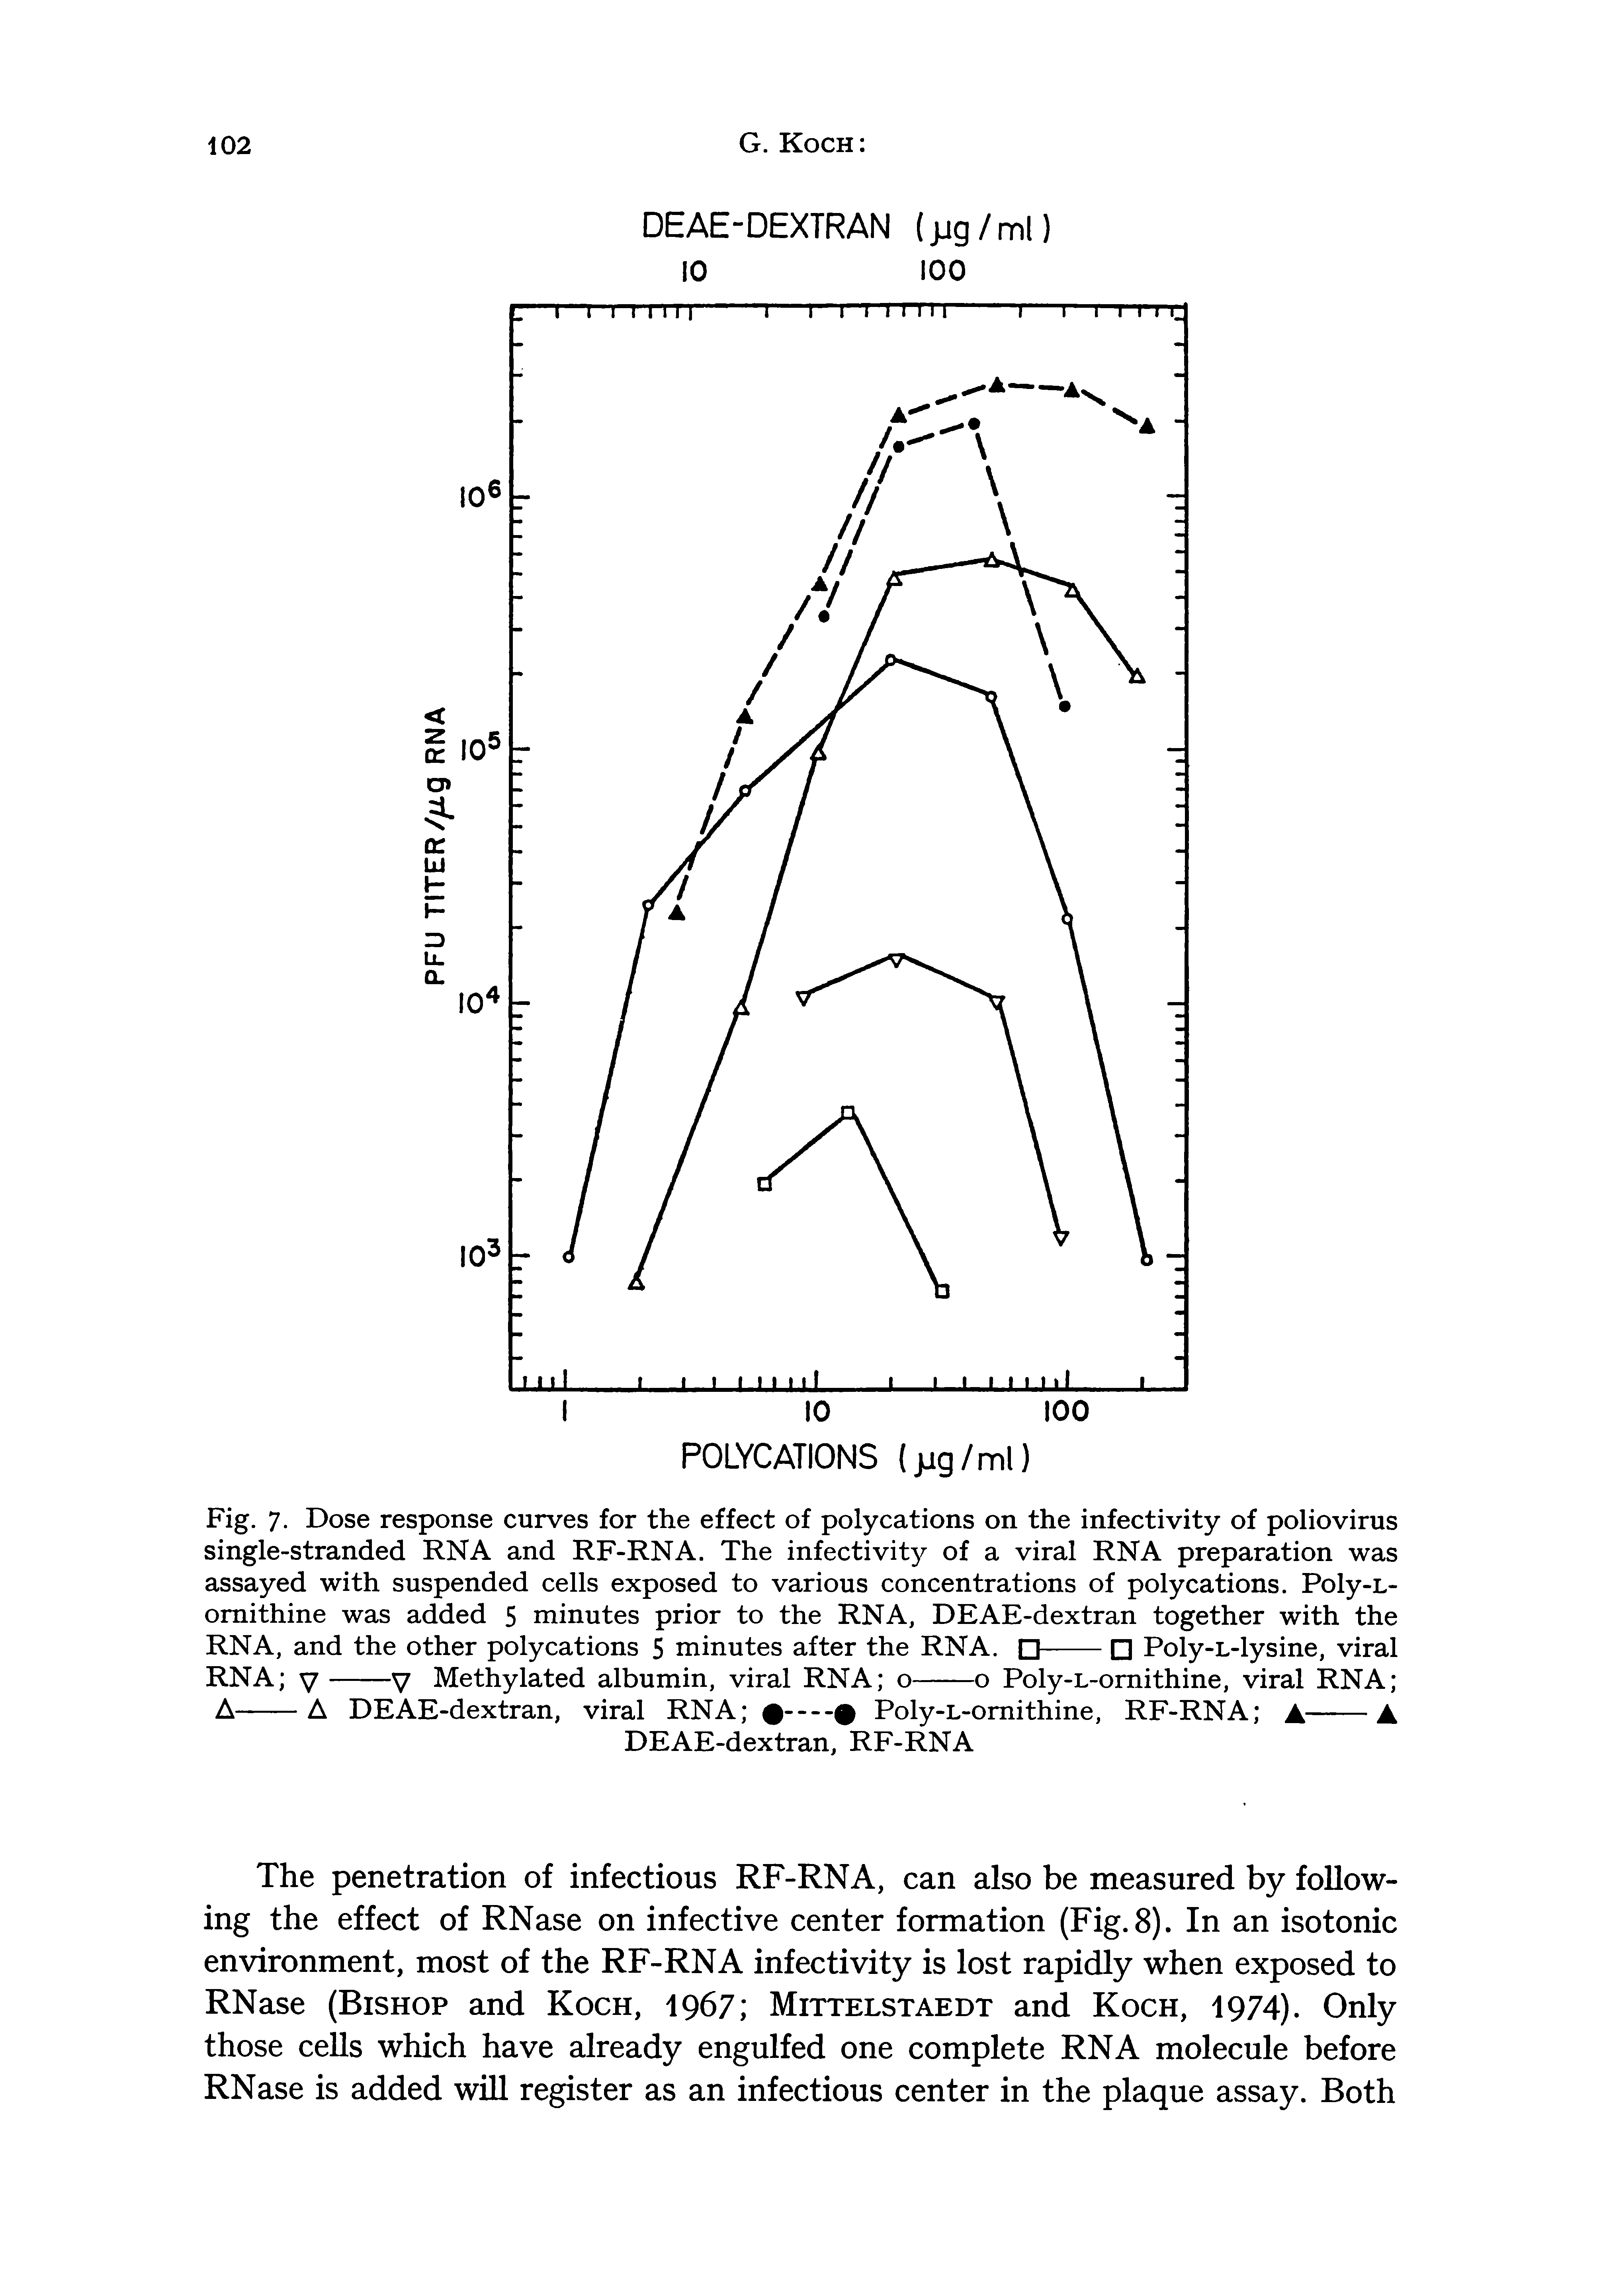 Fig. 7. Dose response curves for the effect of polycations on the infectivity of poliovirus single-stranded RNA and RF-RNA. The infectivity of a viral RNA preparation was assayed with suspended cells exposed to various concentrations of polycations. Poly-L-omithine was added 5 minutes prior to the RNA, DEAE-dextran together with the...